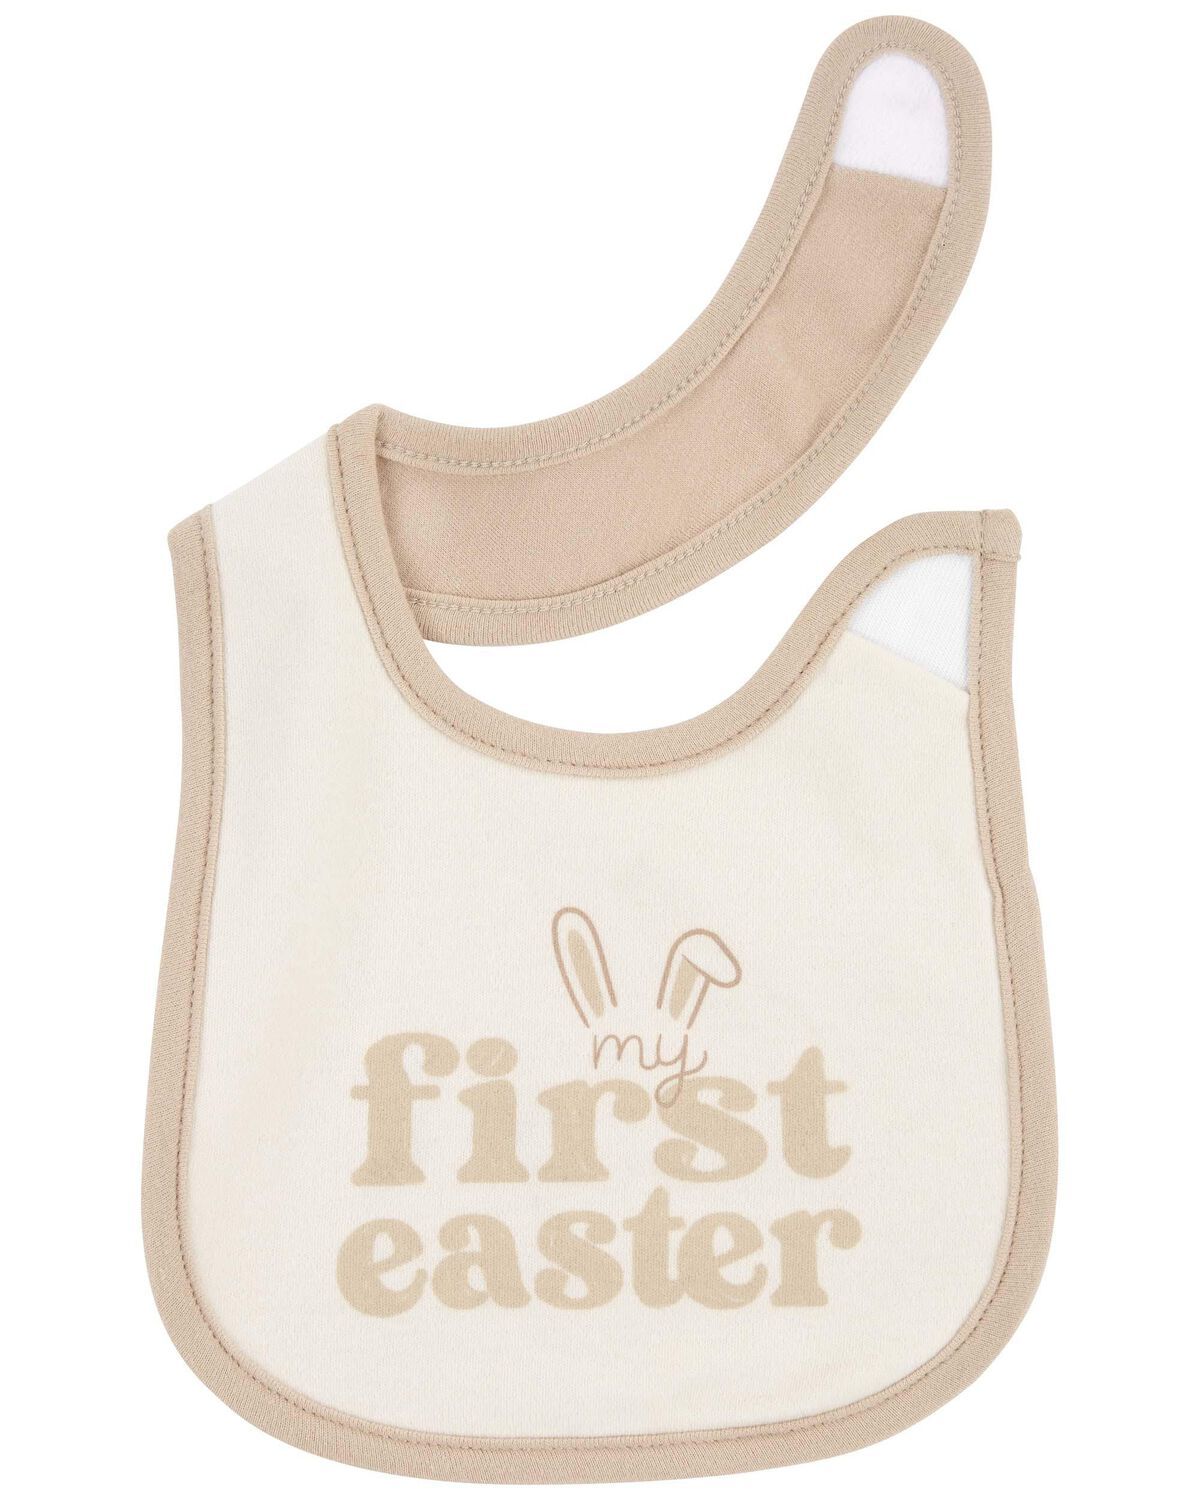 Ivory Baby First Easter Teething Bib | carters.com | Carter's